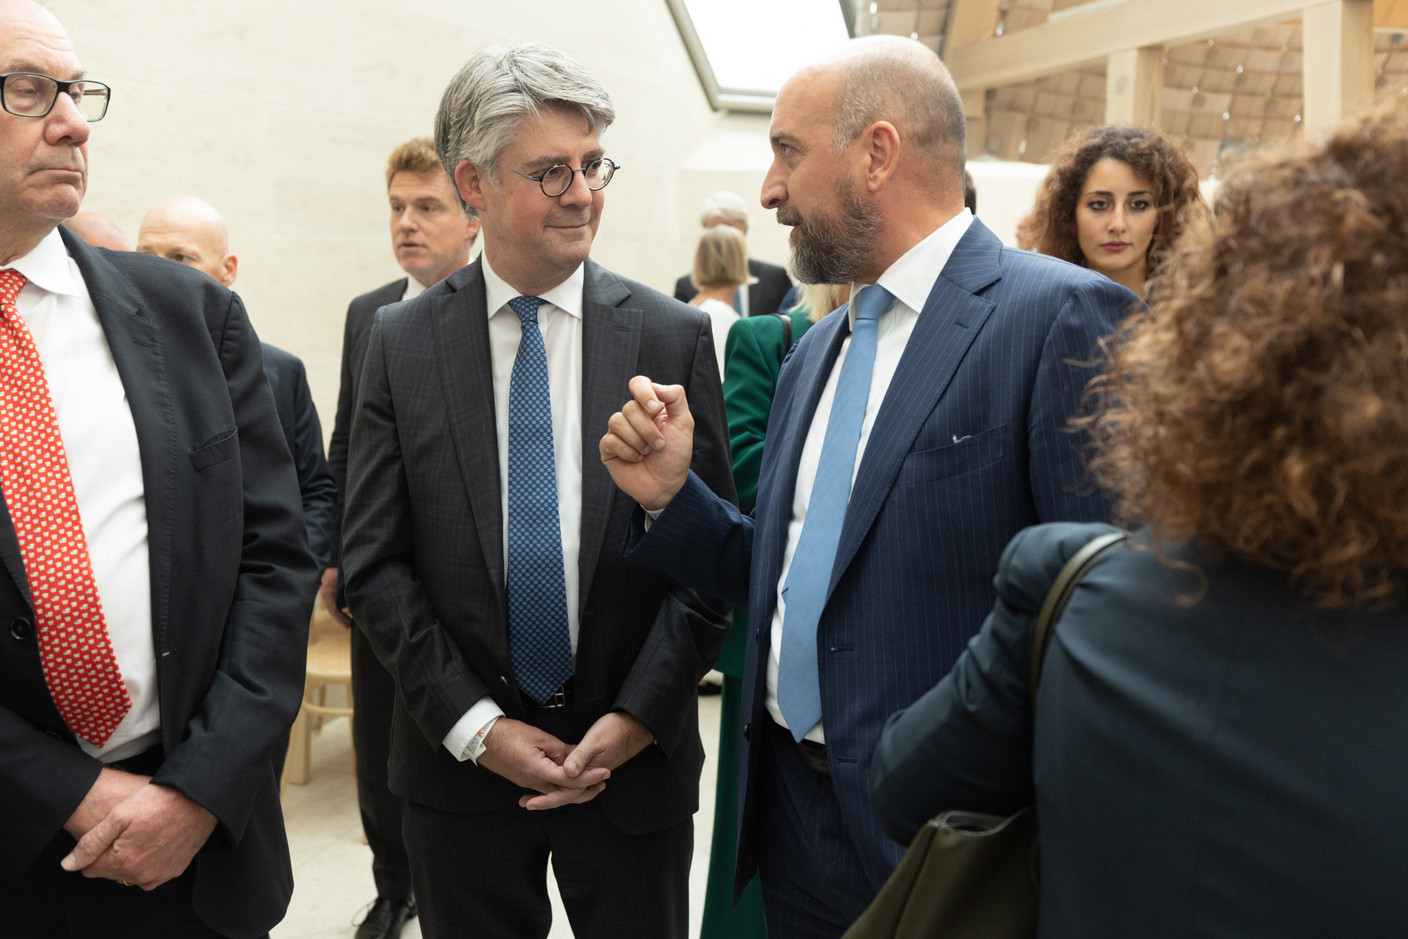 Marco Zwick, director at the Luxembourg financial regulator CSSF and Andrea Gentilini, head of market infrastructures division at the CSSF, are seen during the Luxembourg Financial Markets Association’s 65th anniversary reception, 13 September 2022. Photo: Guy Wolff